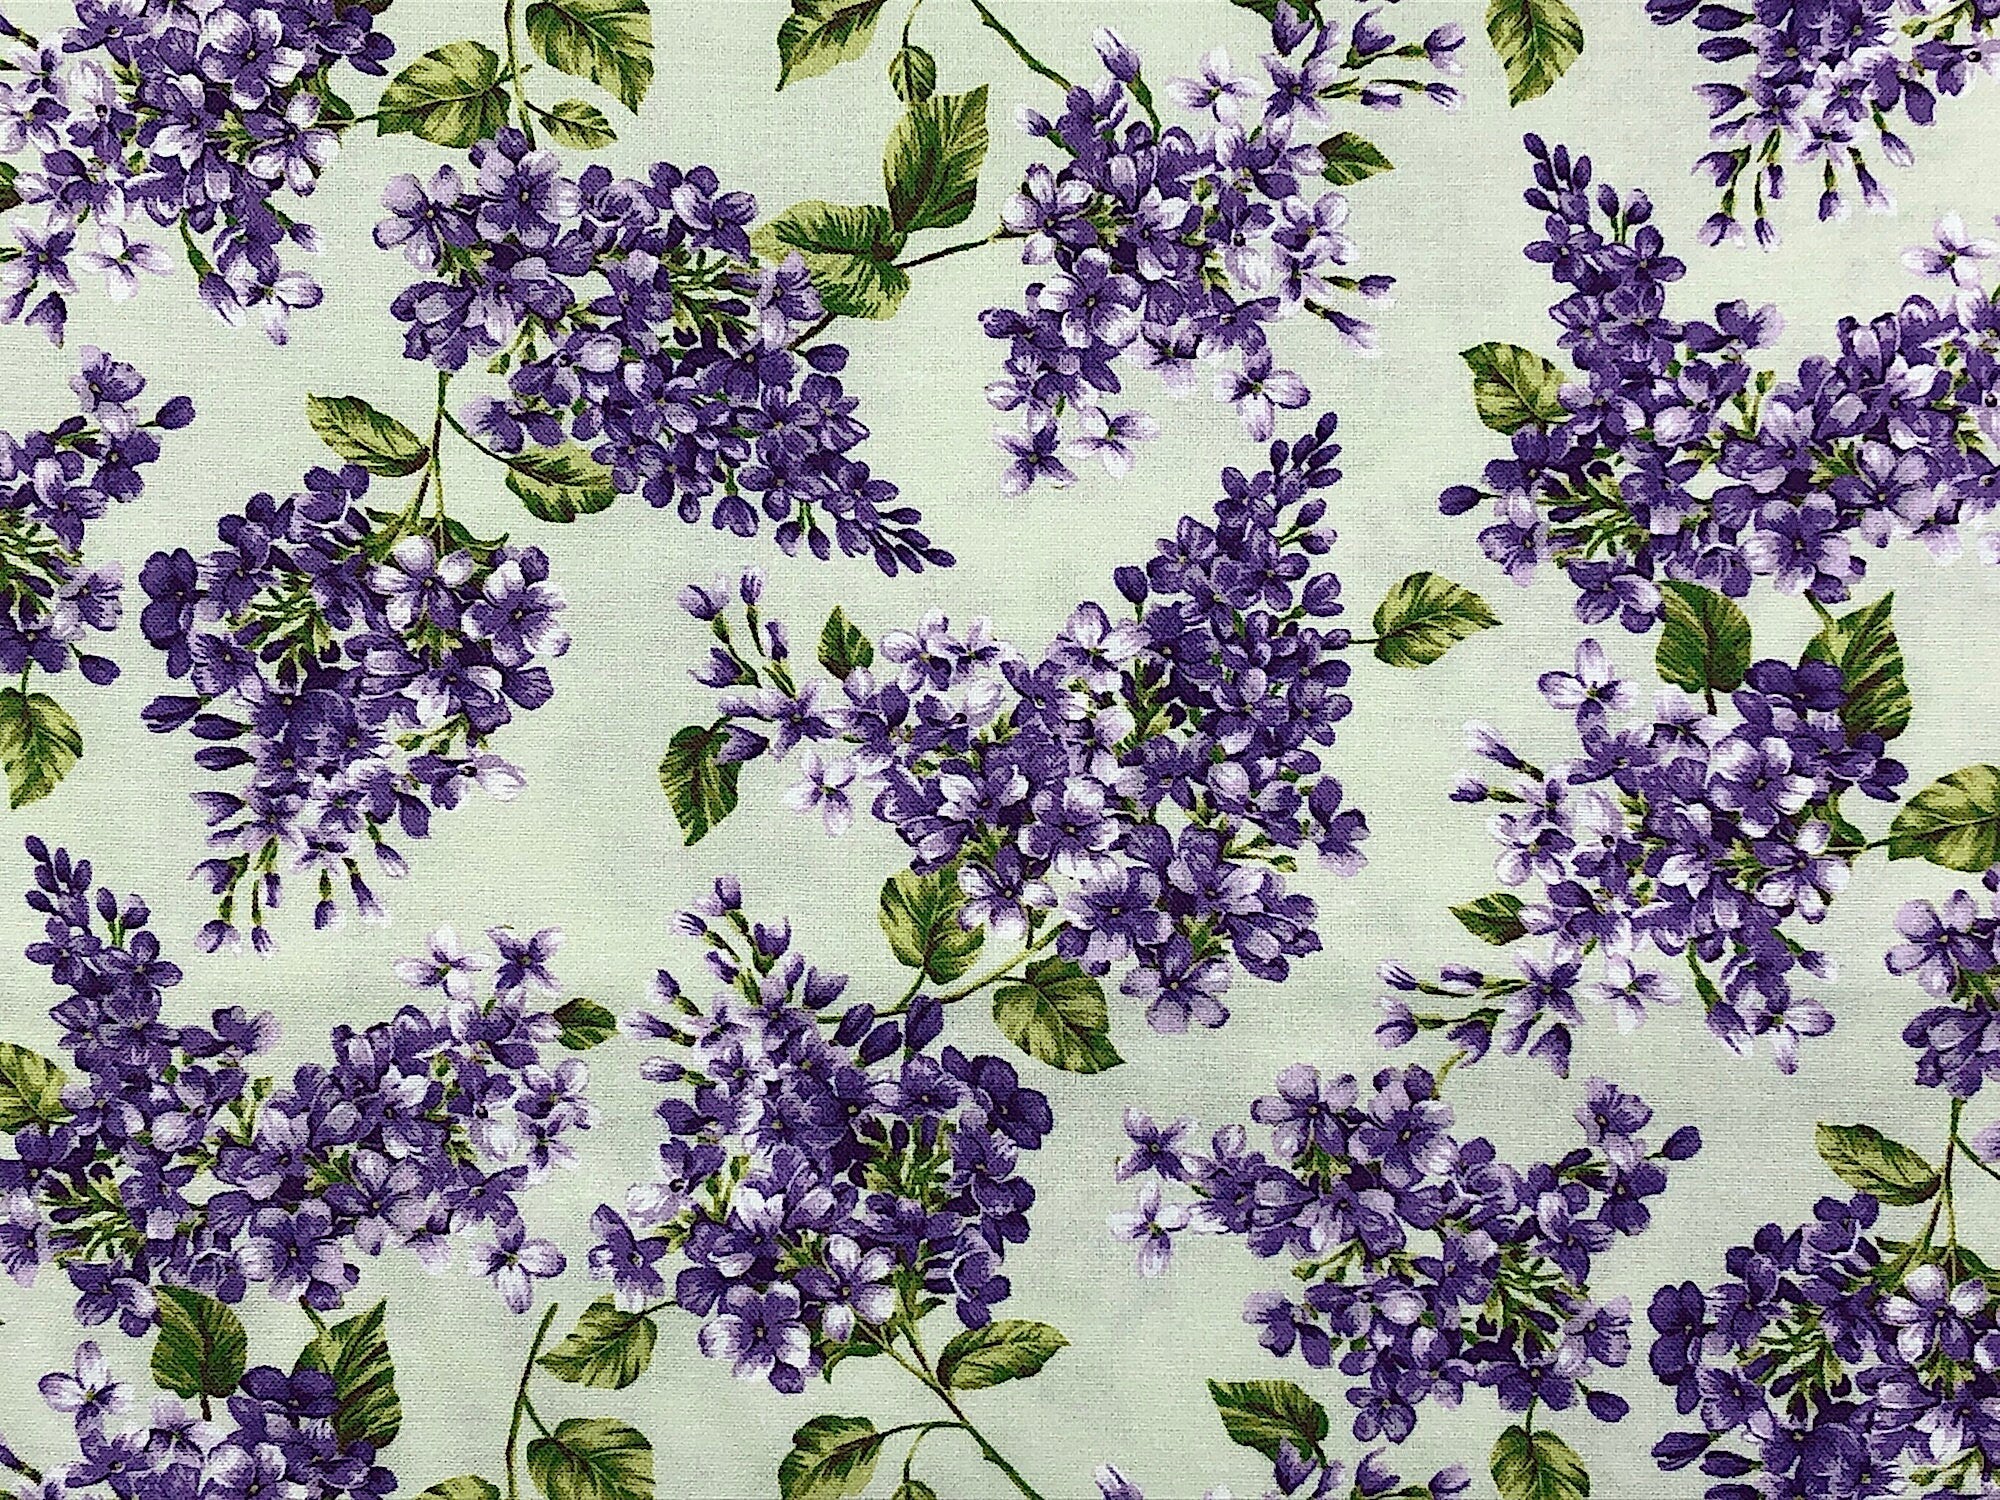 This white fabric is covered with Purple Lilacs and green leaves. The Lilacs are randomly placed throughout the pattern.